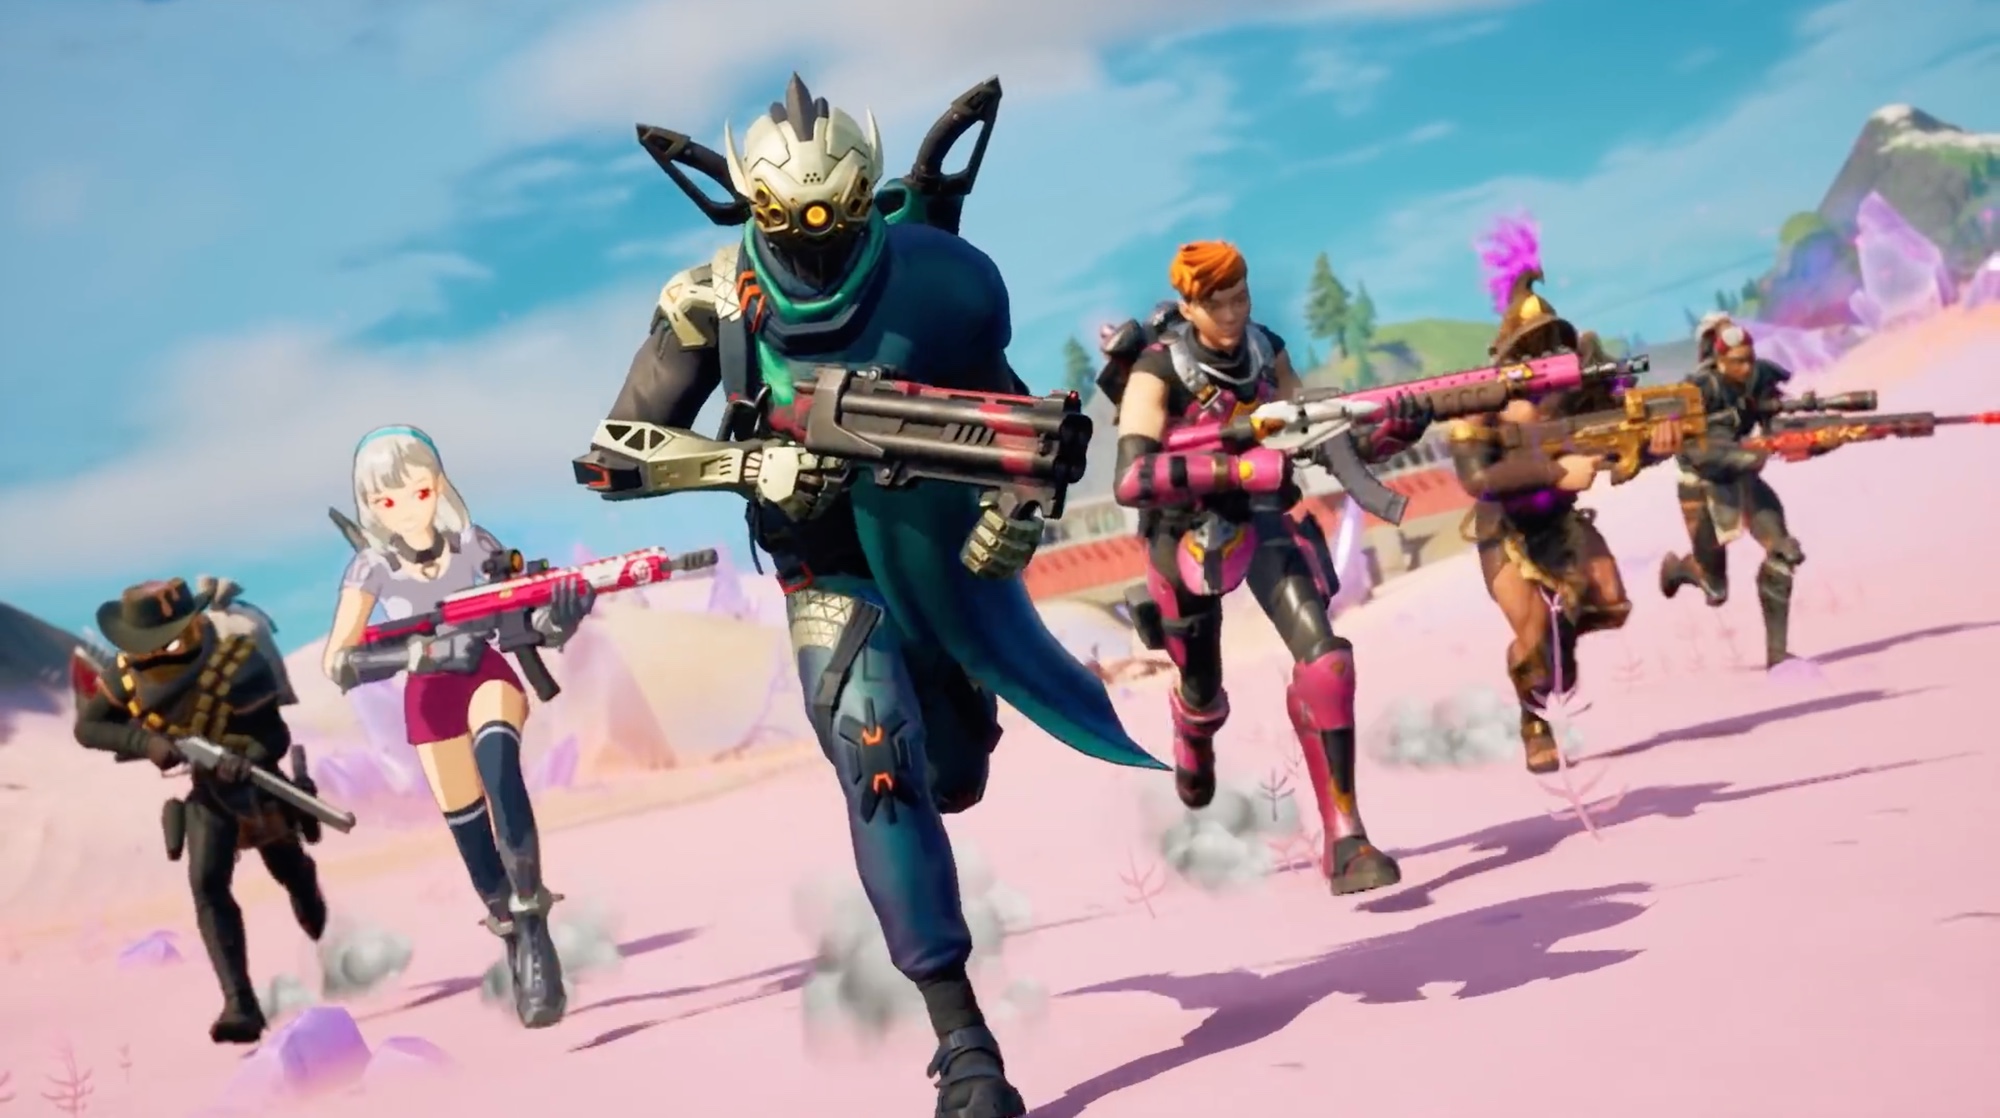 Sony is finally allowing 'Fortnite' PS4 cross-play with Xbox One and Switch